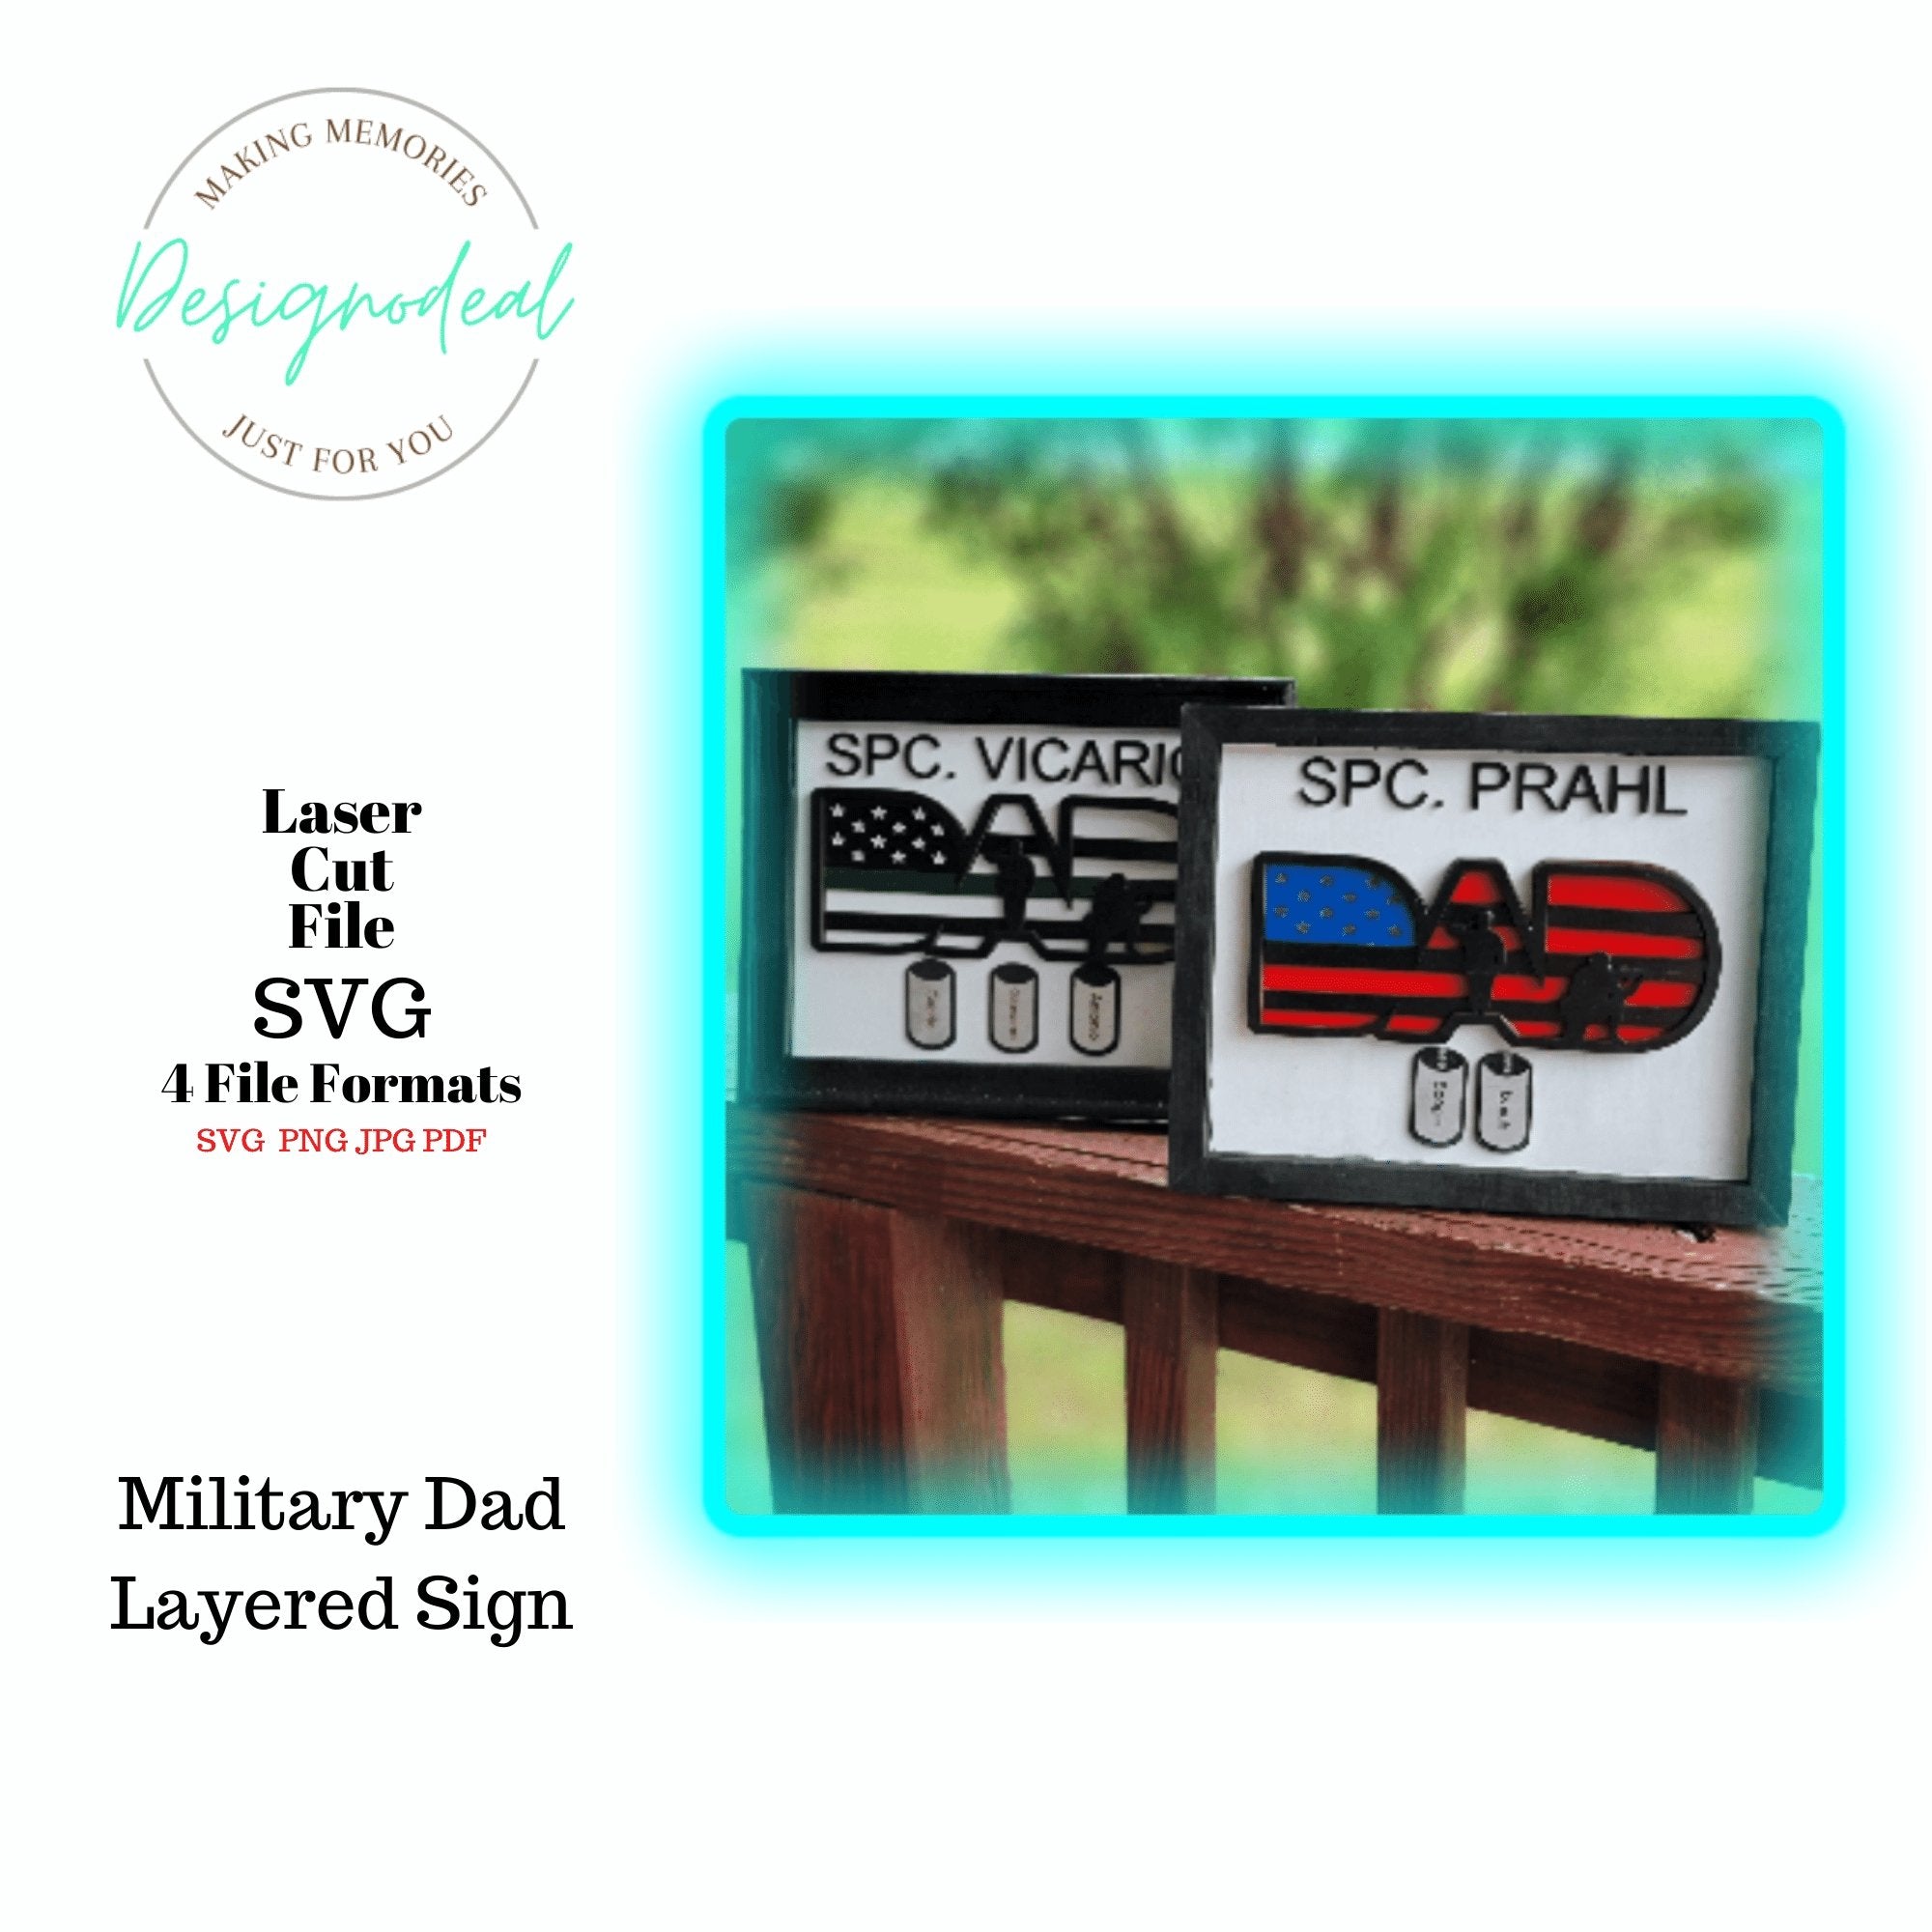 Military Dad Layered Sign Digital File Only - Designodeal